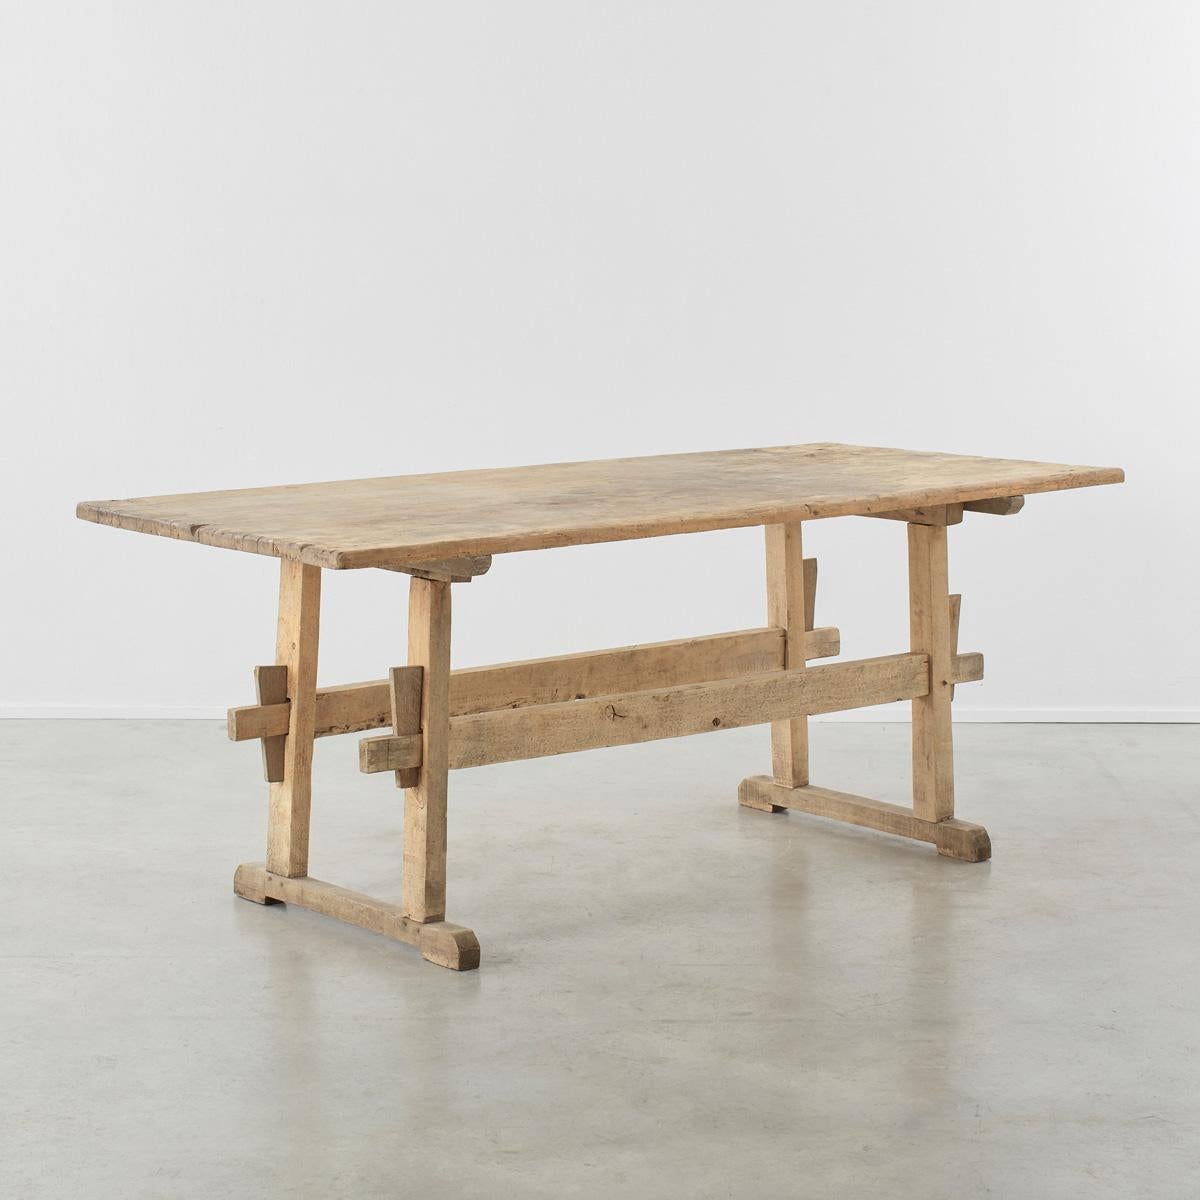 A sincere and elegant pine dining table from the Alps with natural sun-bleached patination which could easily seat six people. Its delightfully rustic character is enhanced by exposed loose-wedged mortise and tenon joints on the legs and an unusual